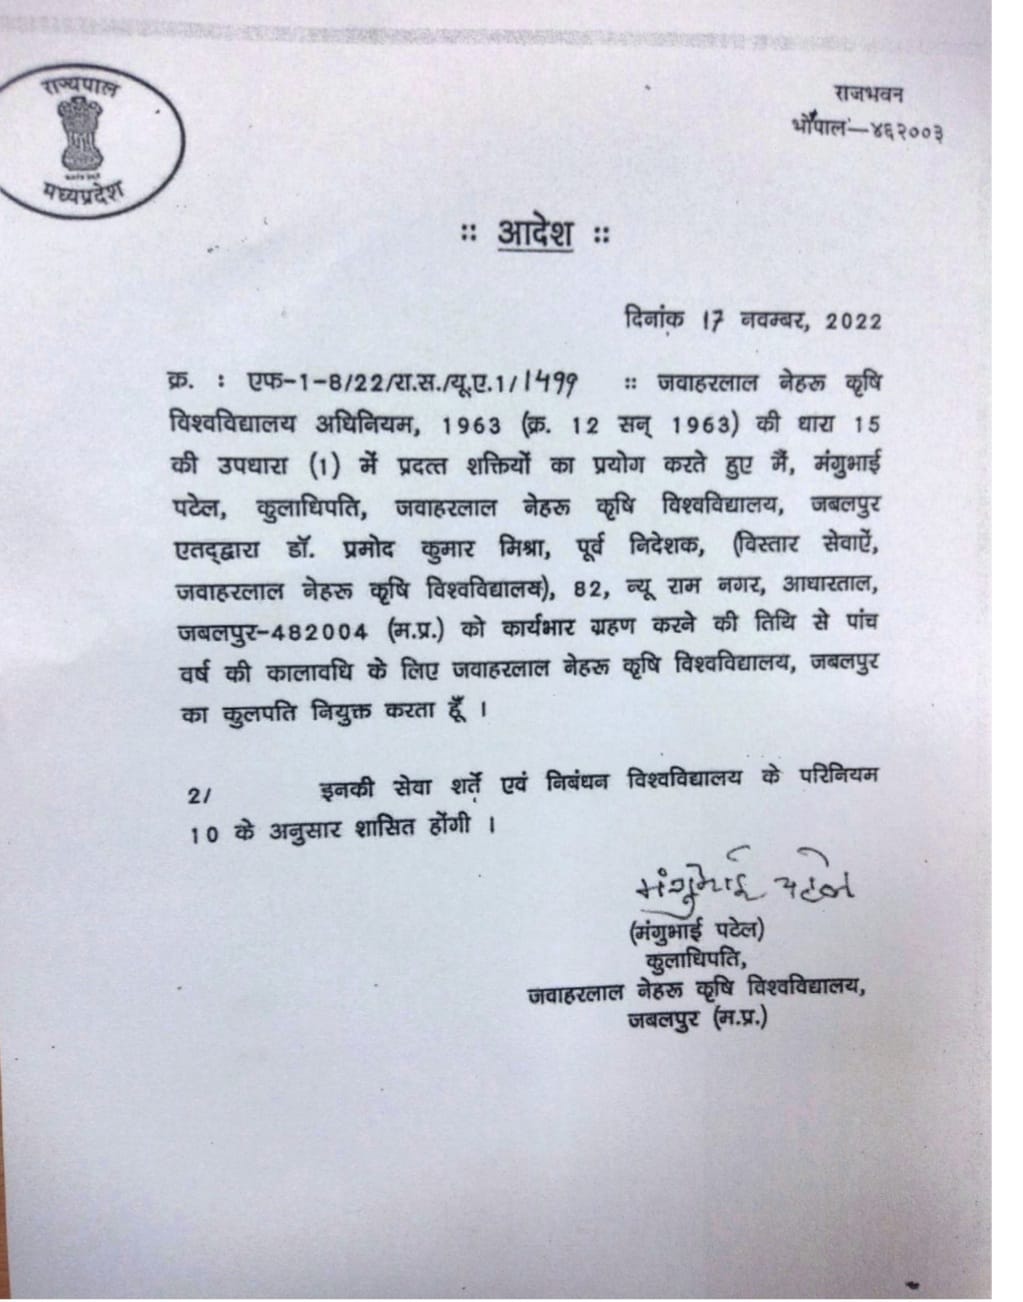 Govind Singh wrote a letter to PM